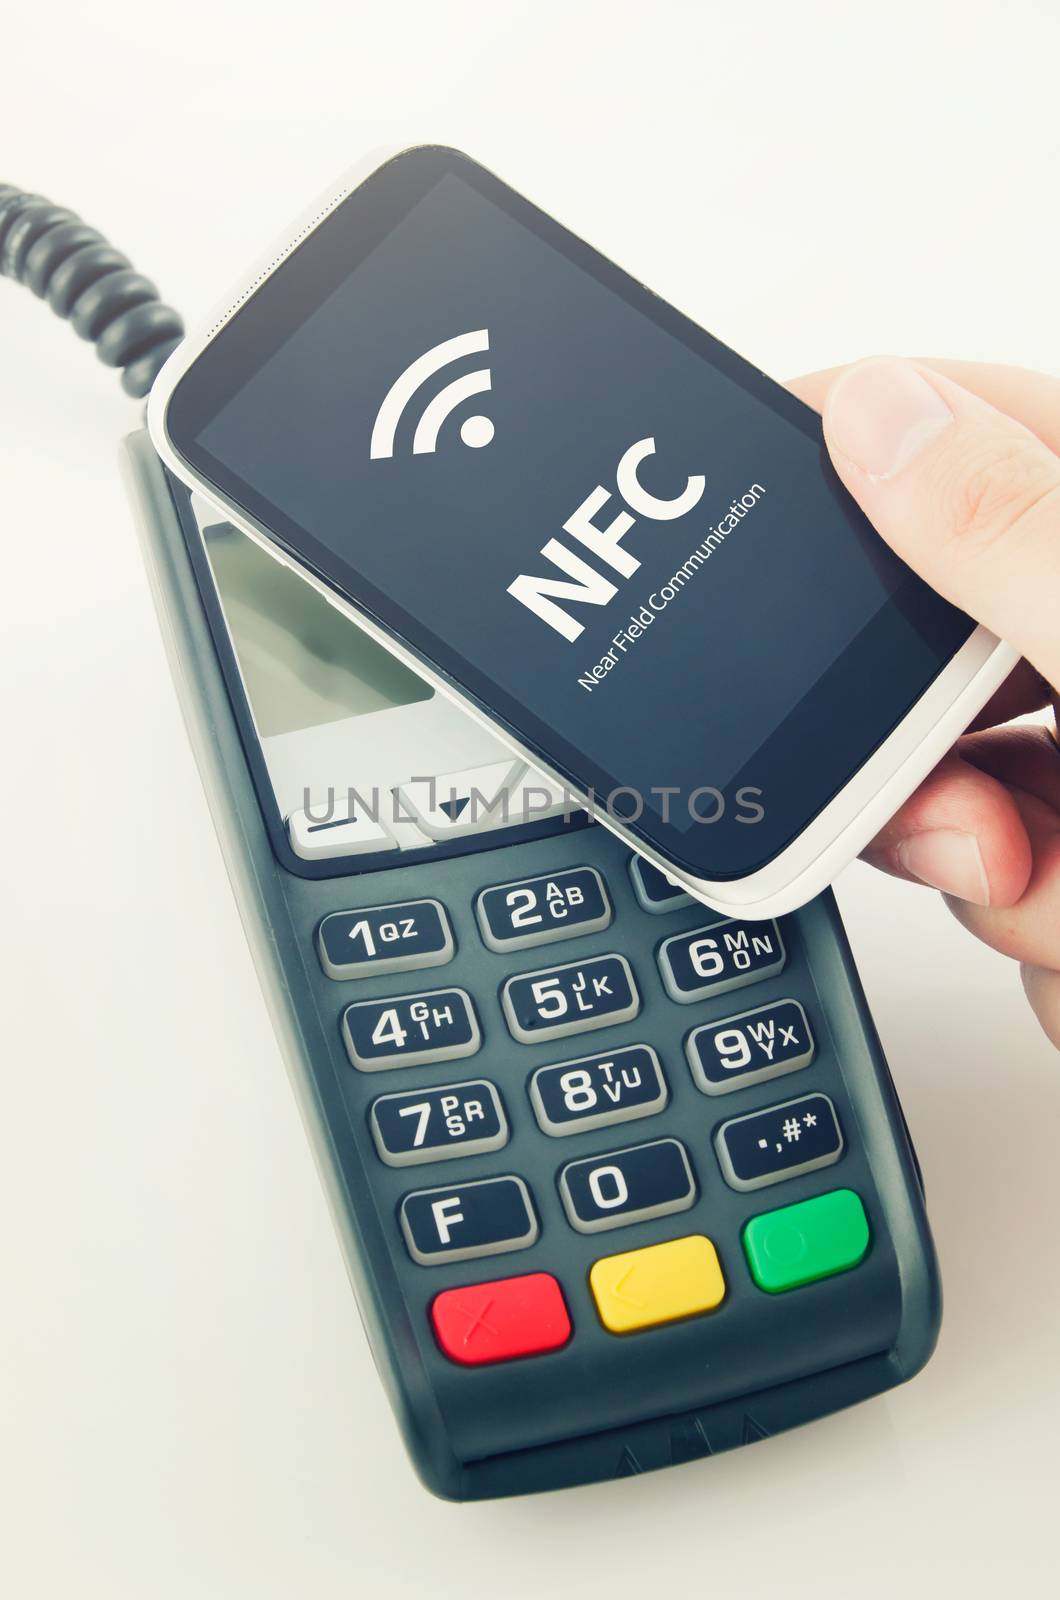 Contactless payment card with NFC chip in smart phone by simpson33